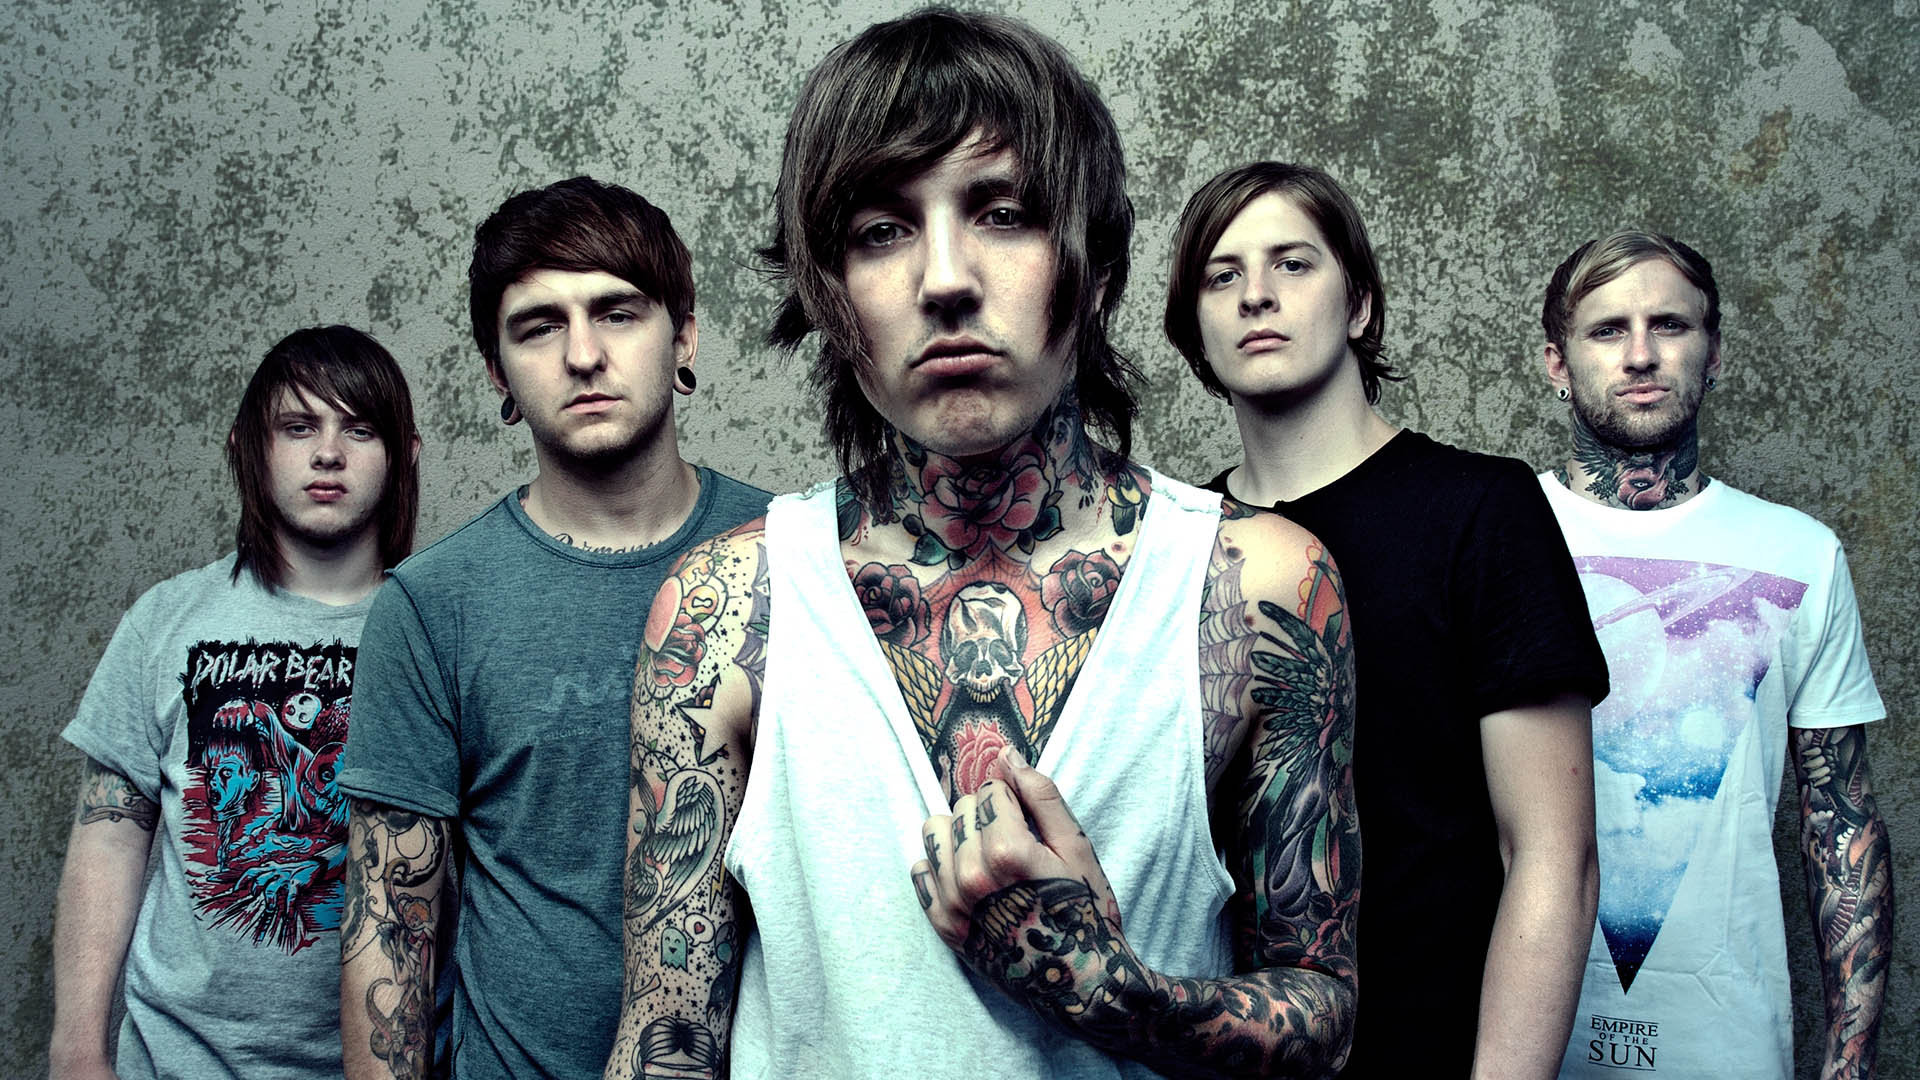 Best Bring Me The Horizon wallpaper ID:190900 for High Resolution full hd 1080p computer